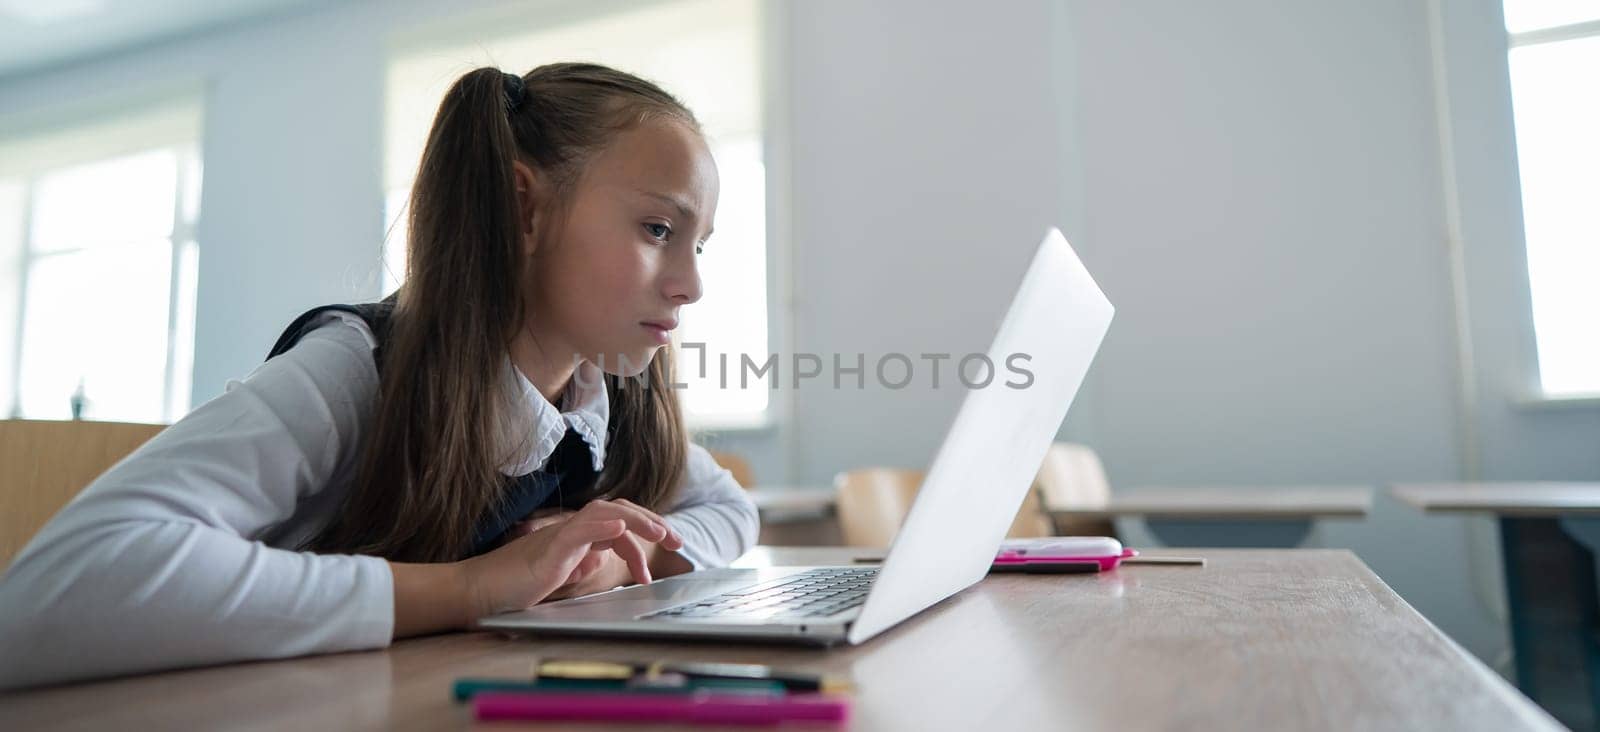 Caucasian girl sits at a desk at school and carefully looks into a laptop